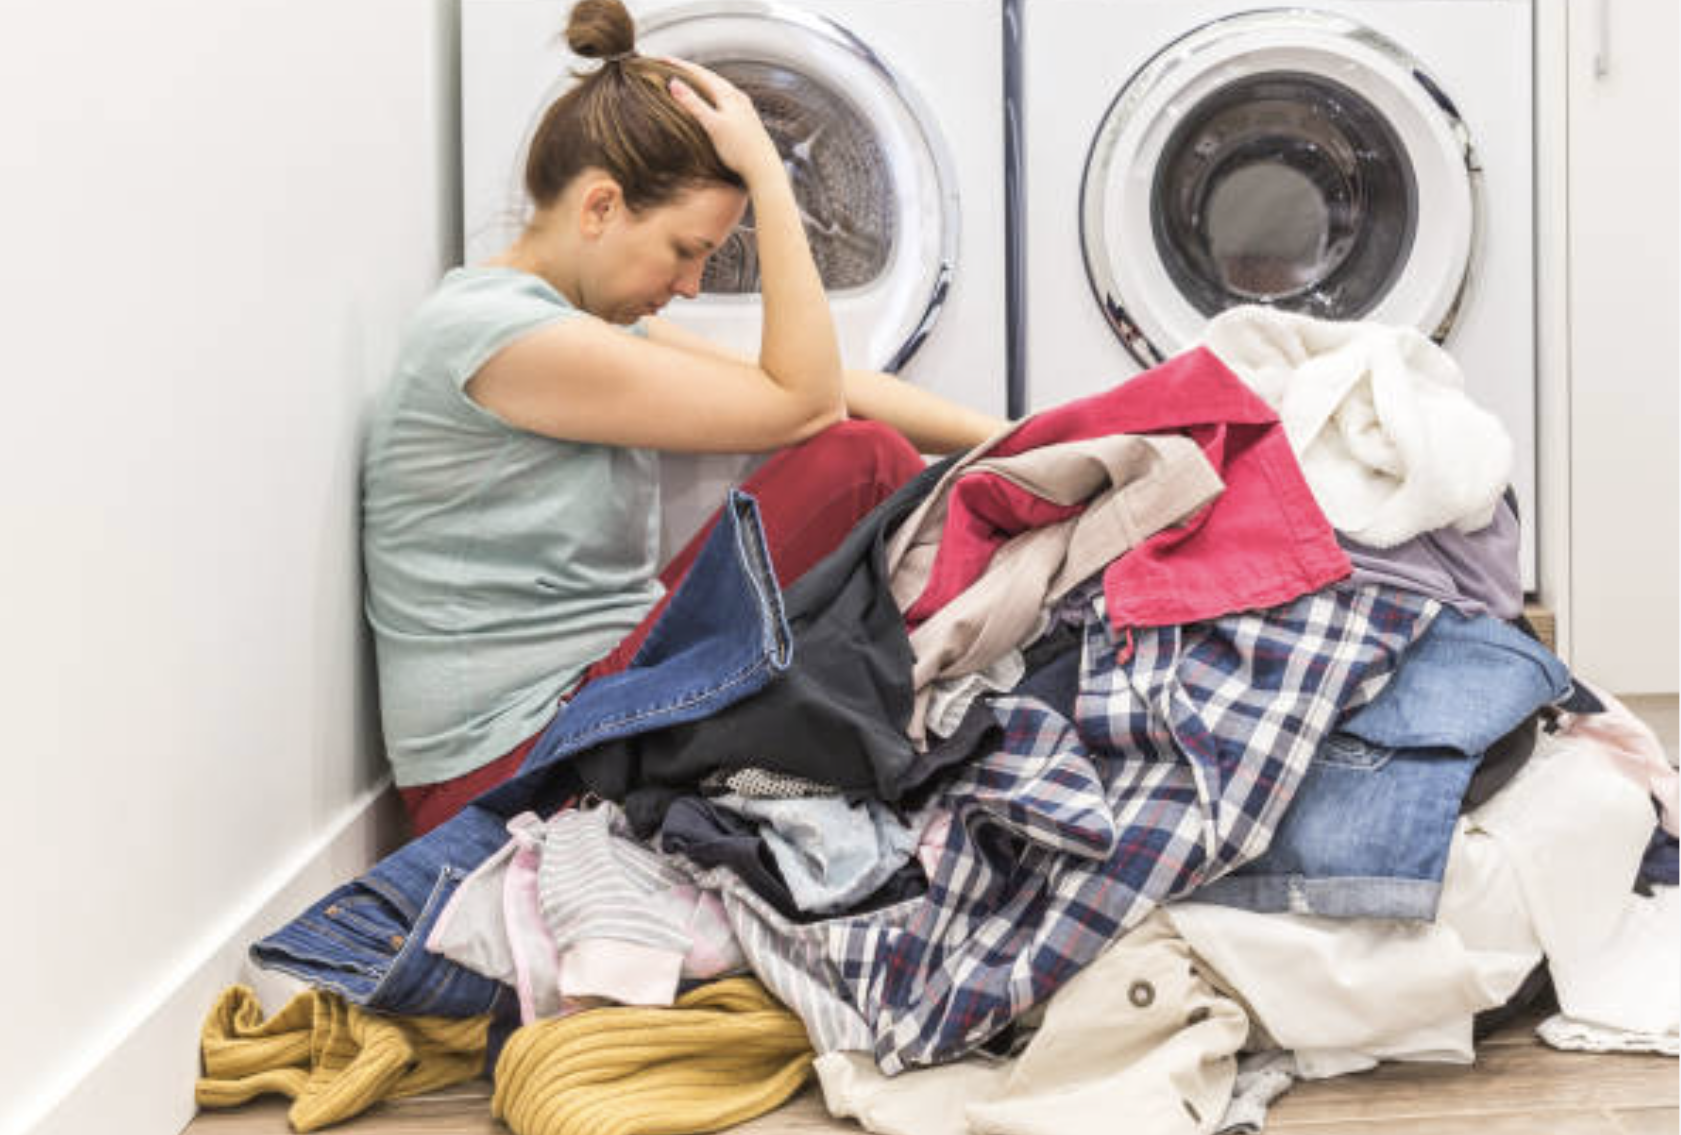 Laundry rooms can be messy but with organization can be a great place to do chores.